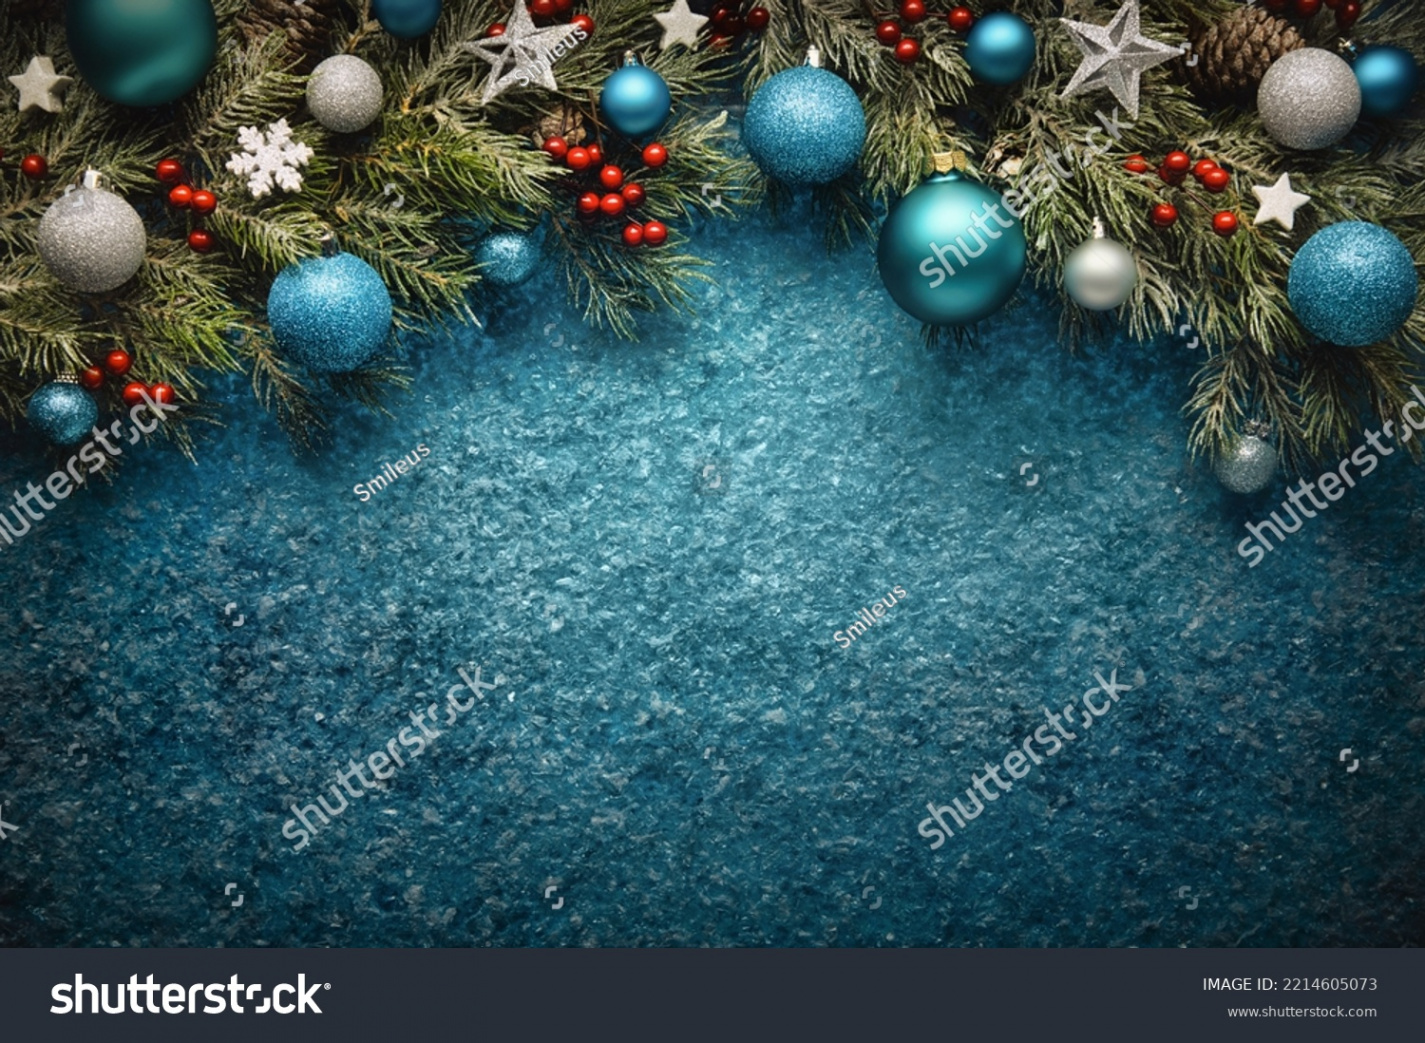 + Thousand Christmas Background Teal Royalty-Free Images, Stock